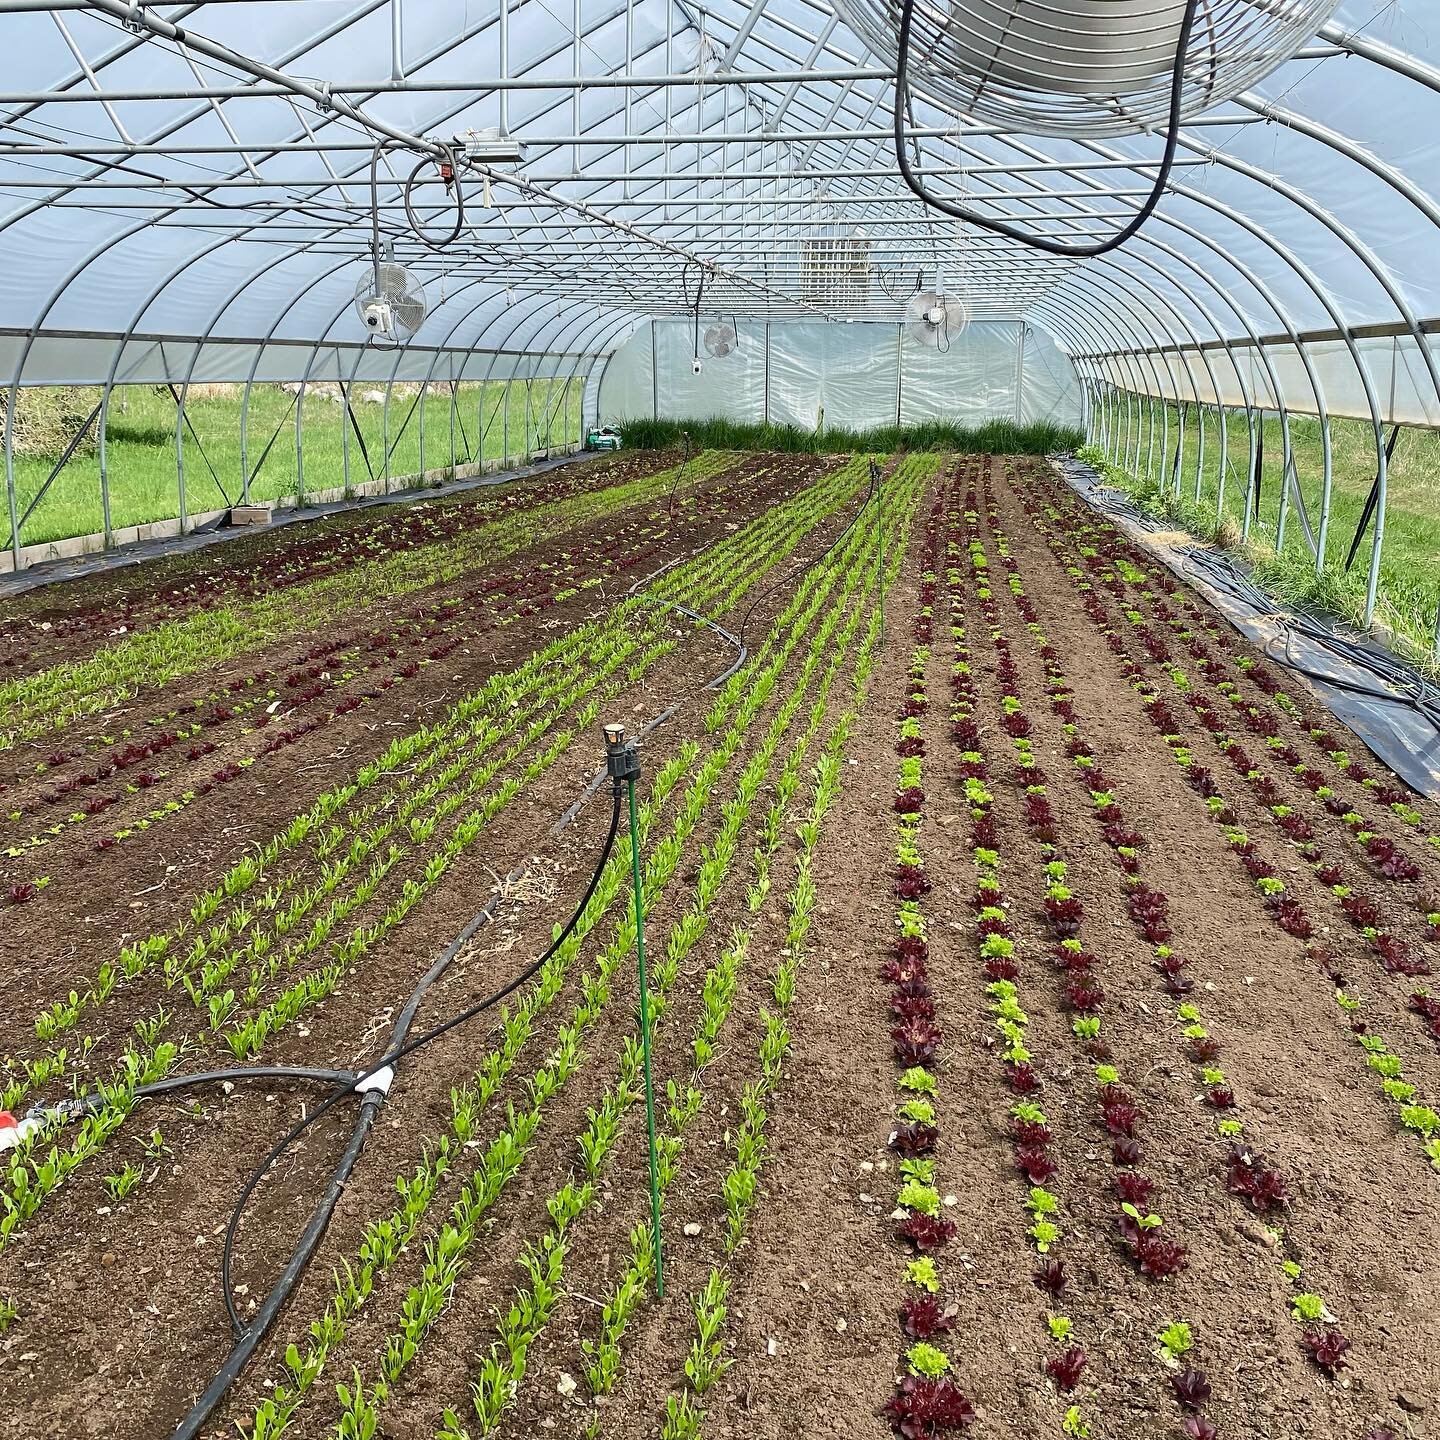 There is nothing quite like a freshly cultivated and weed free hoophouse. #salad #northernmichiganfarming